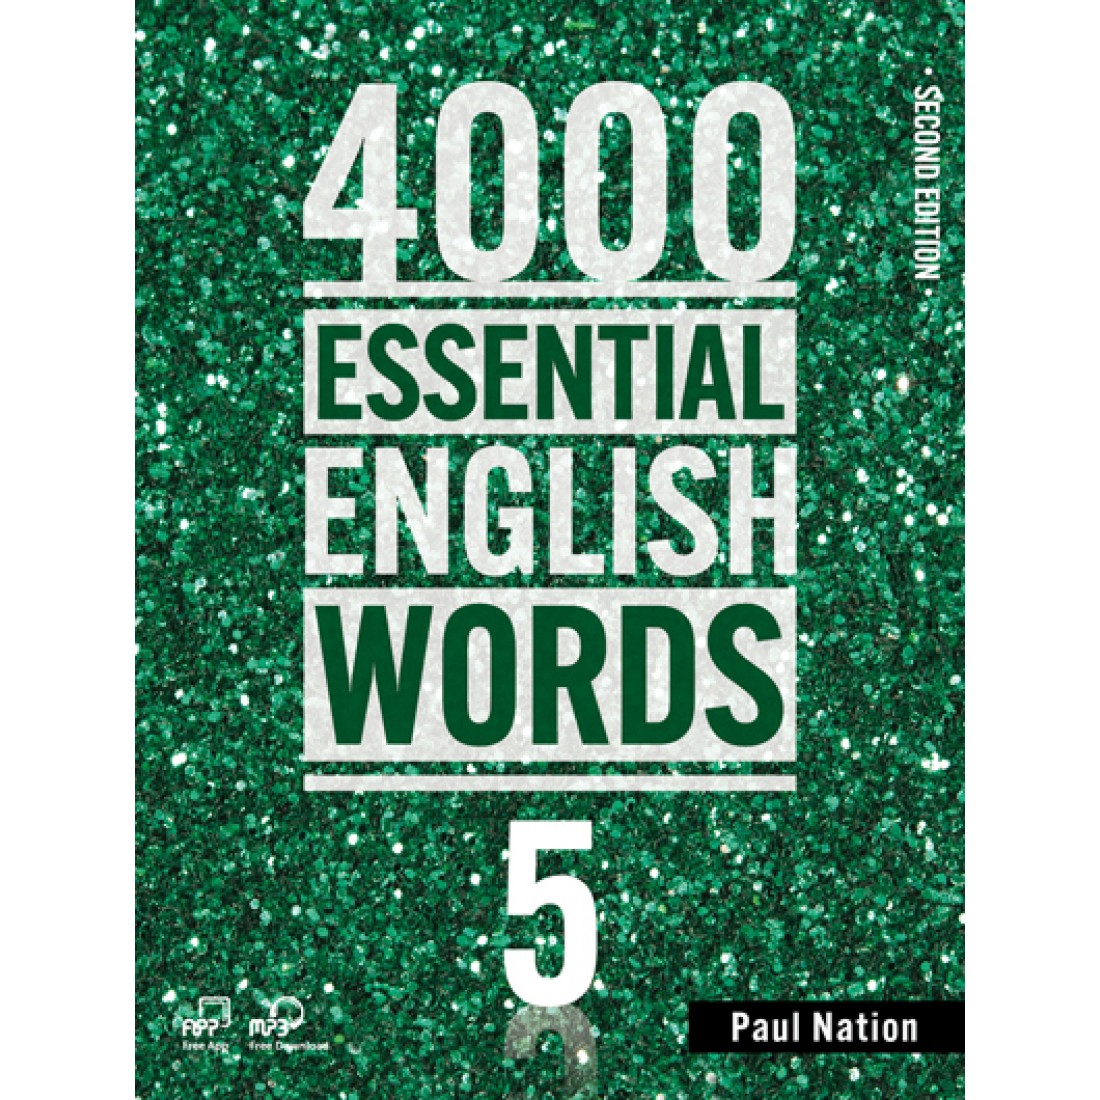 Year book words. 4000 Essential English Words книги. 4000 Essential English Words 1. 4000 Essential English Words 5. 4000 Essential English Words 2.